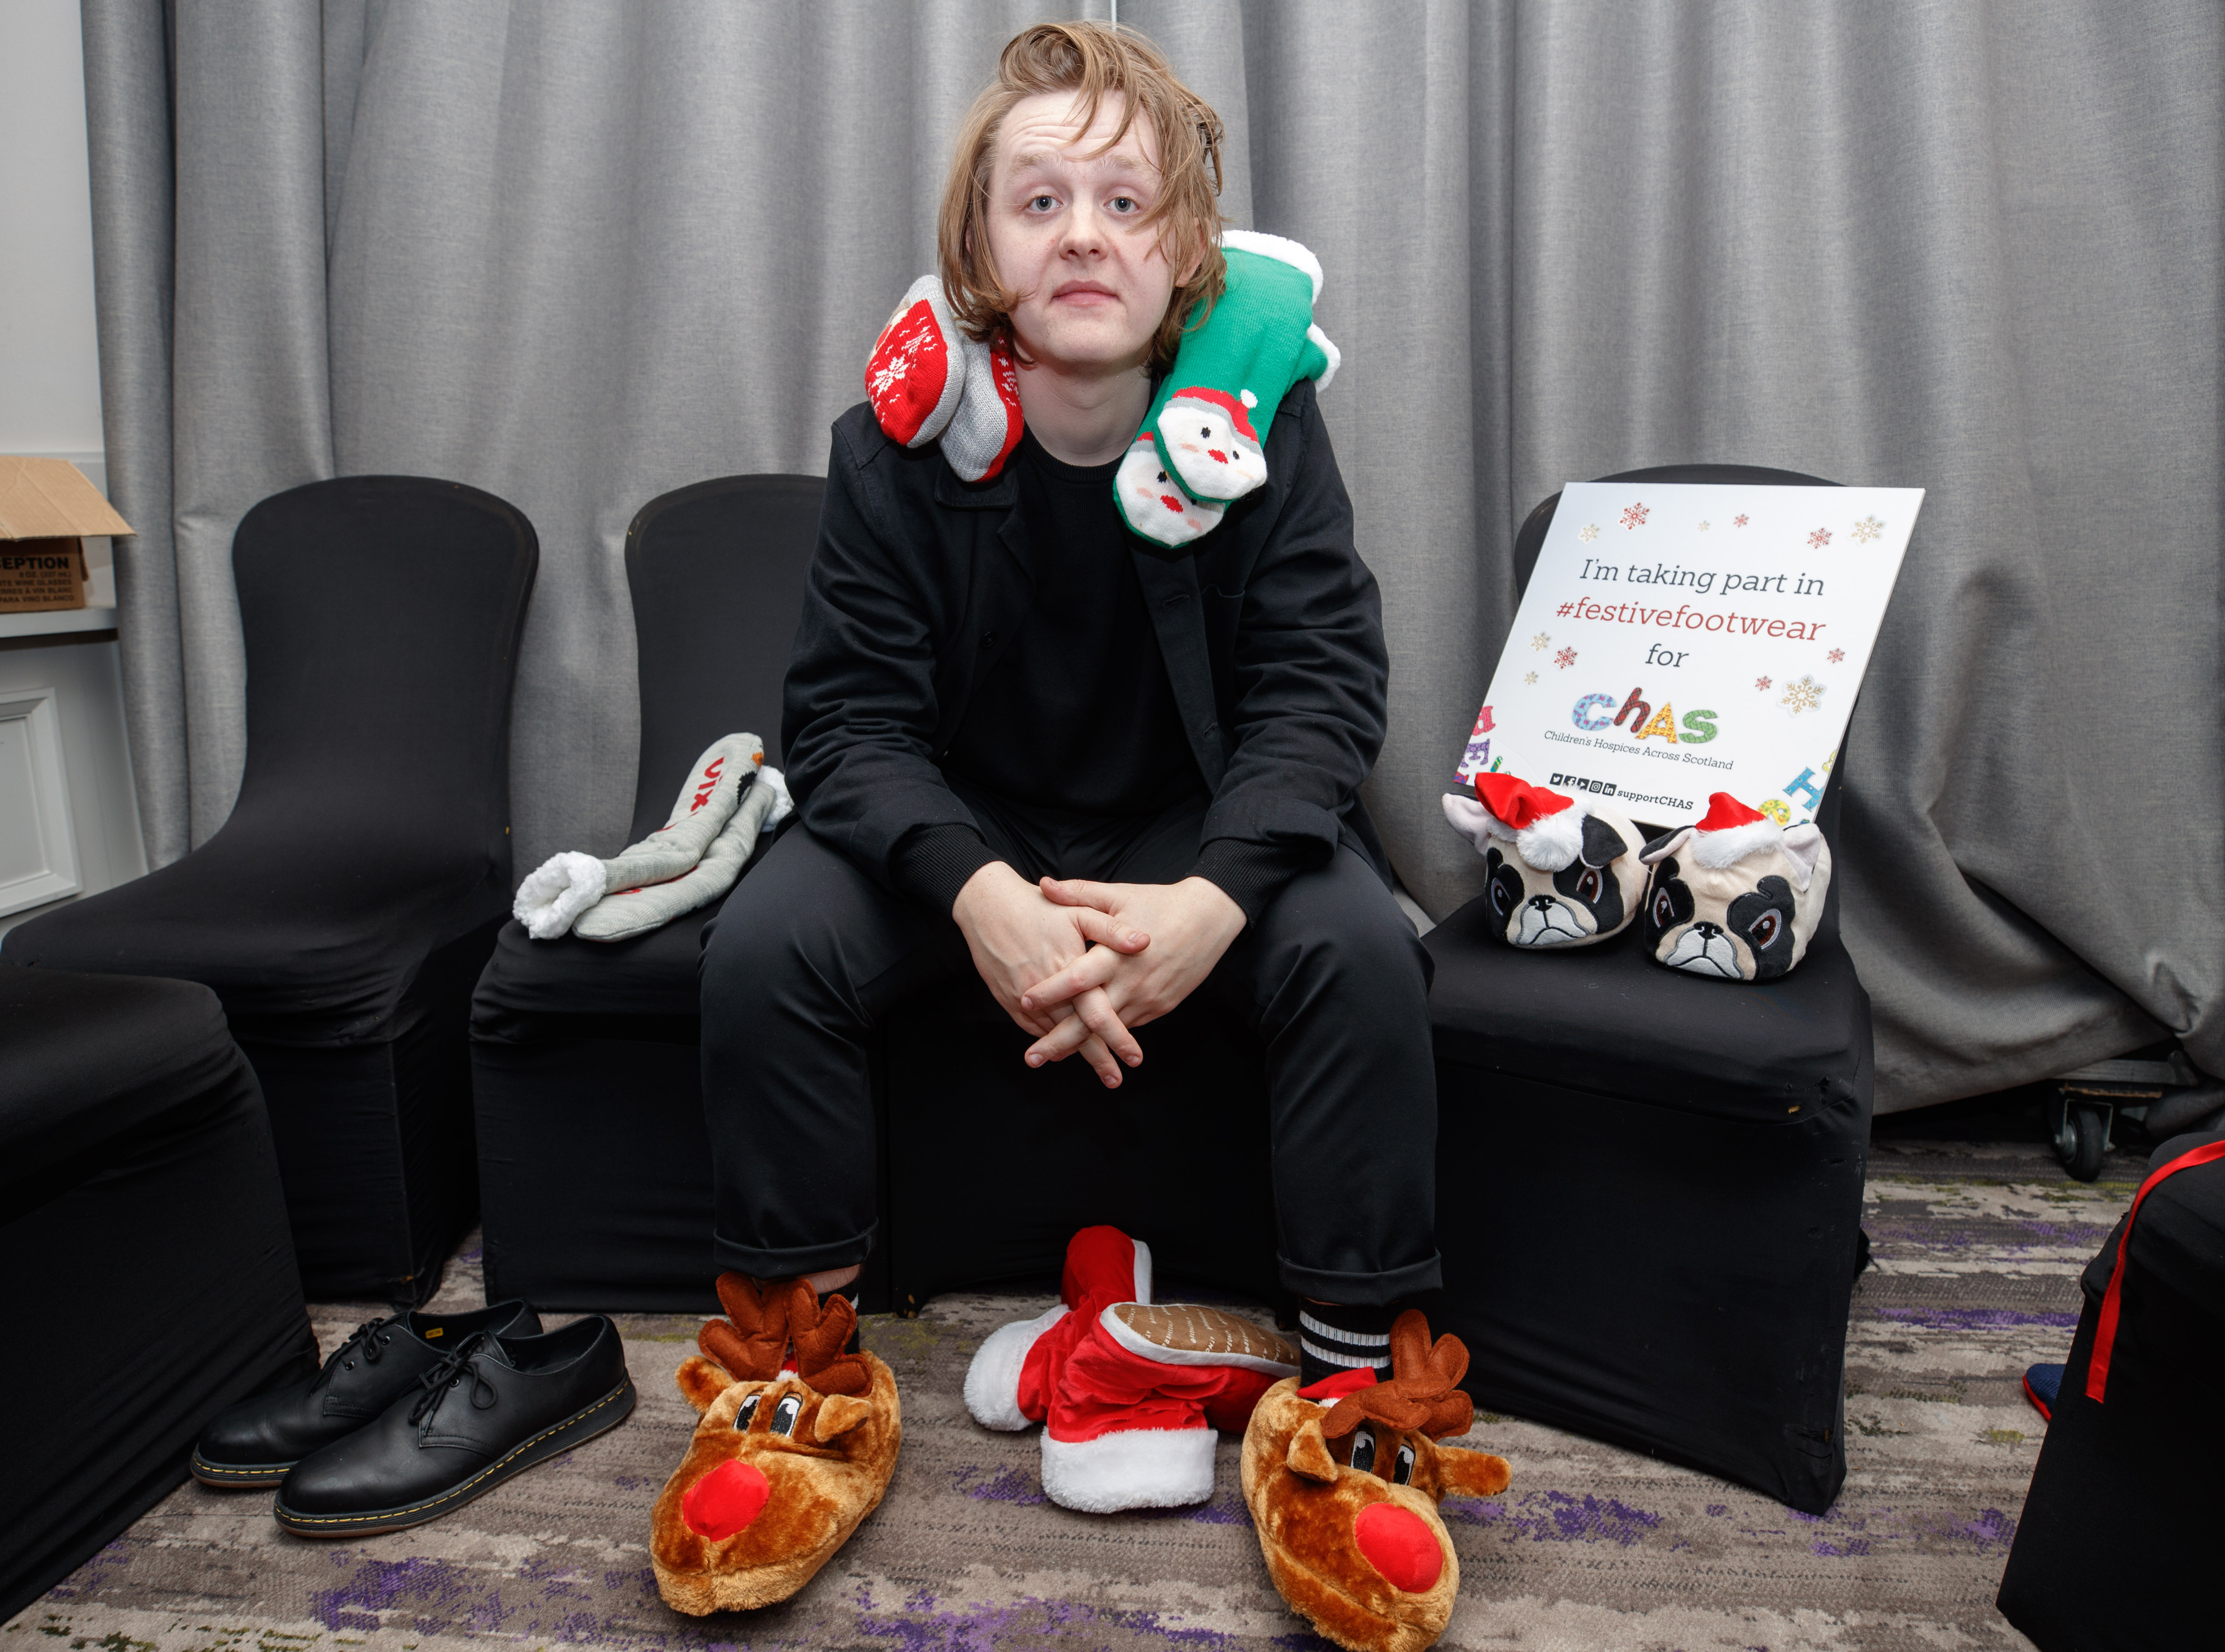 Lewis Capaldi poses in his Christmas socks last year, to help raise awareness of Festive Friday, CHAS's Christmas appeal.